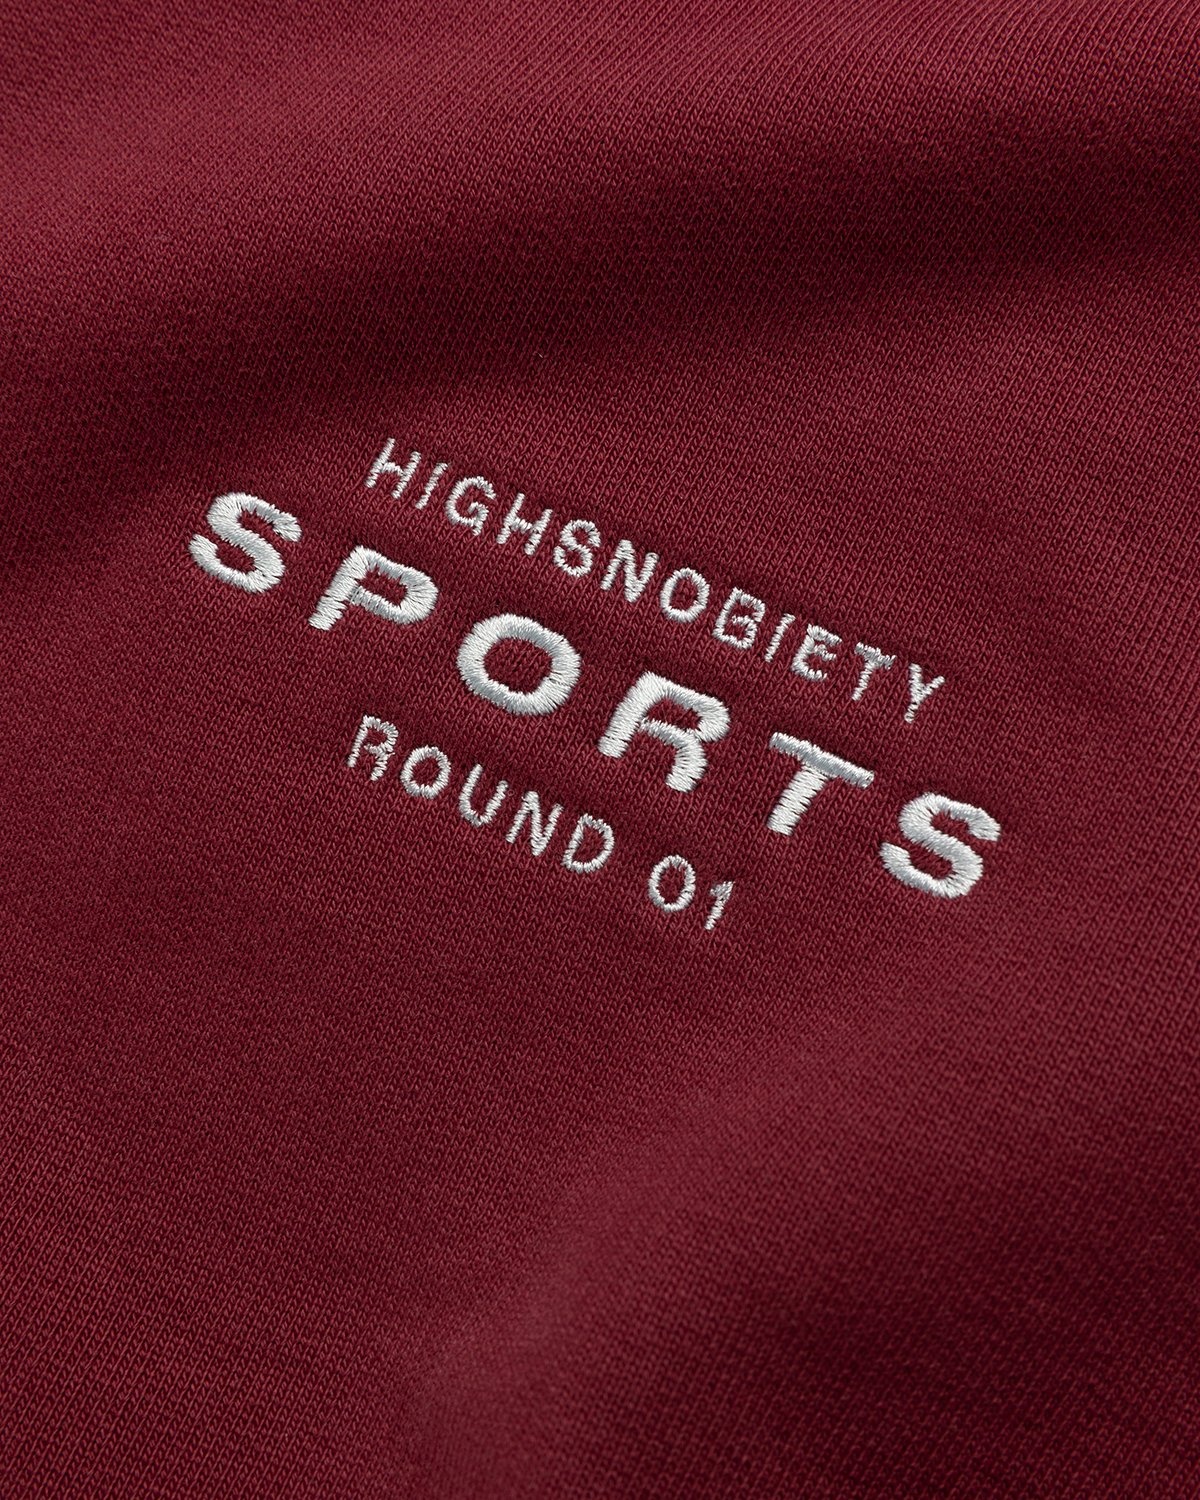 Highsnobiety – HS Sports Focus Hoodie Bordeaux - Sweats - Red - Image 4